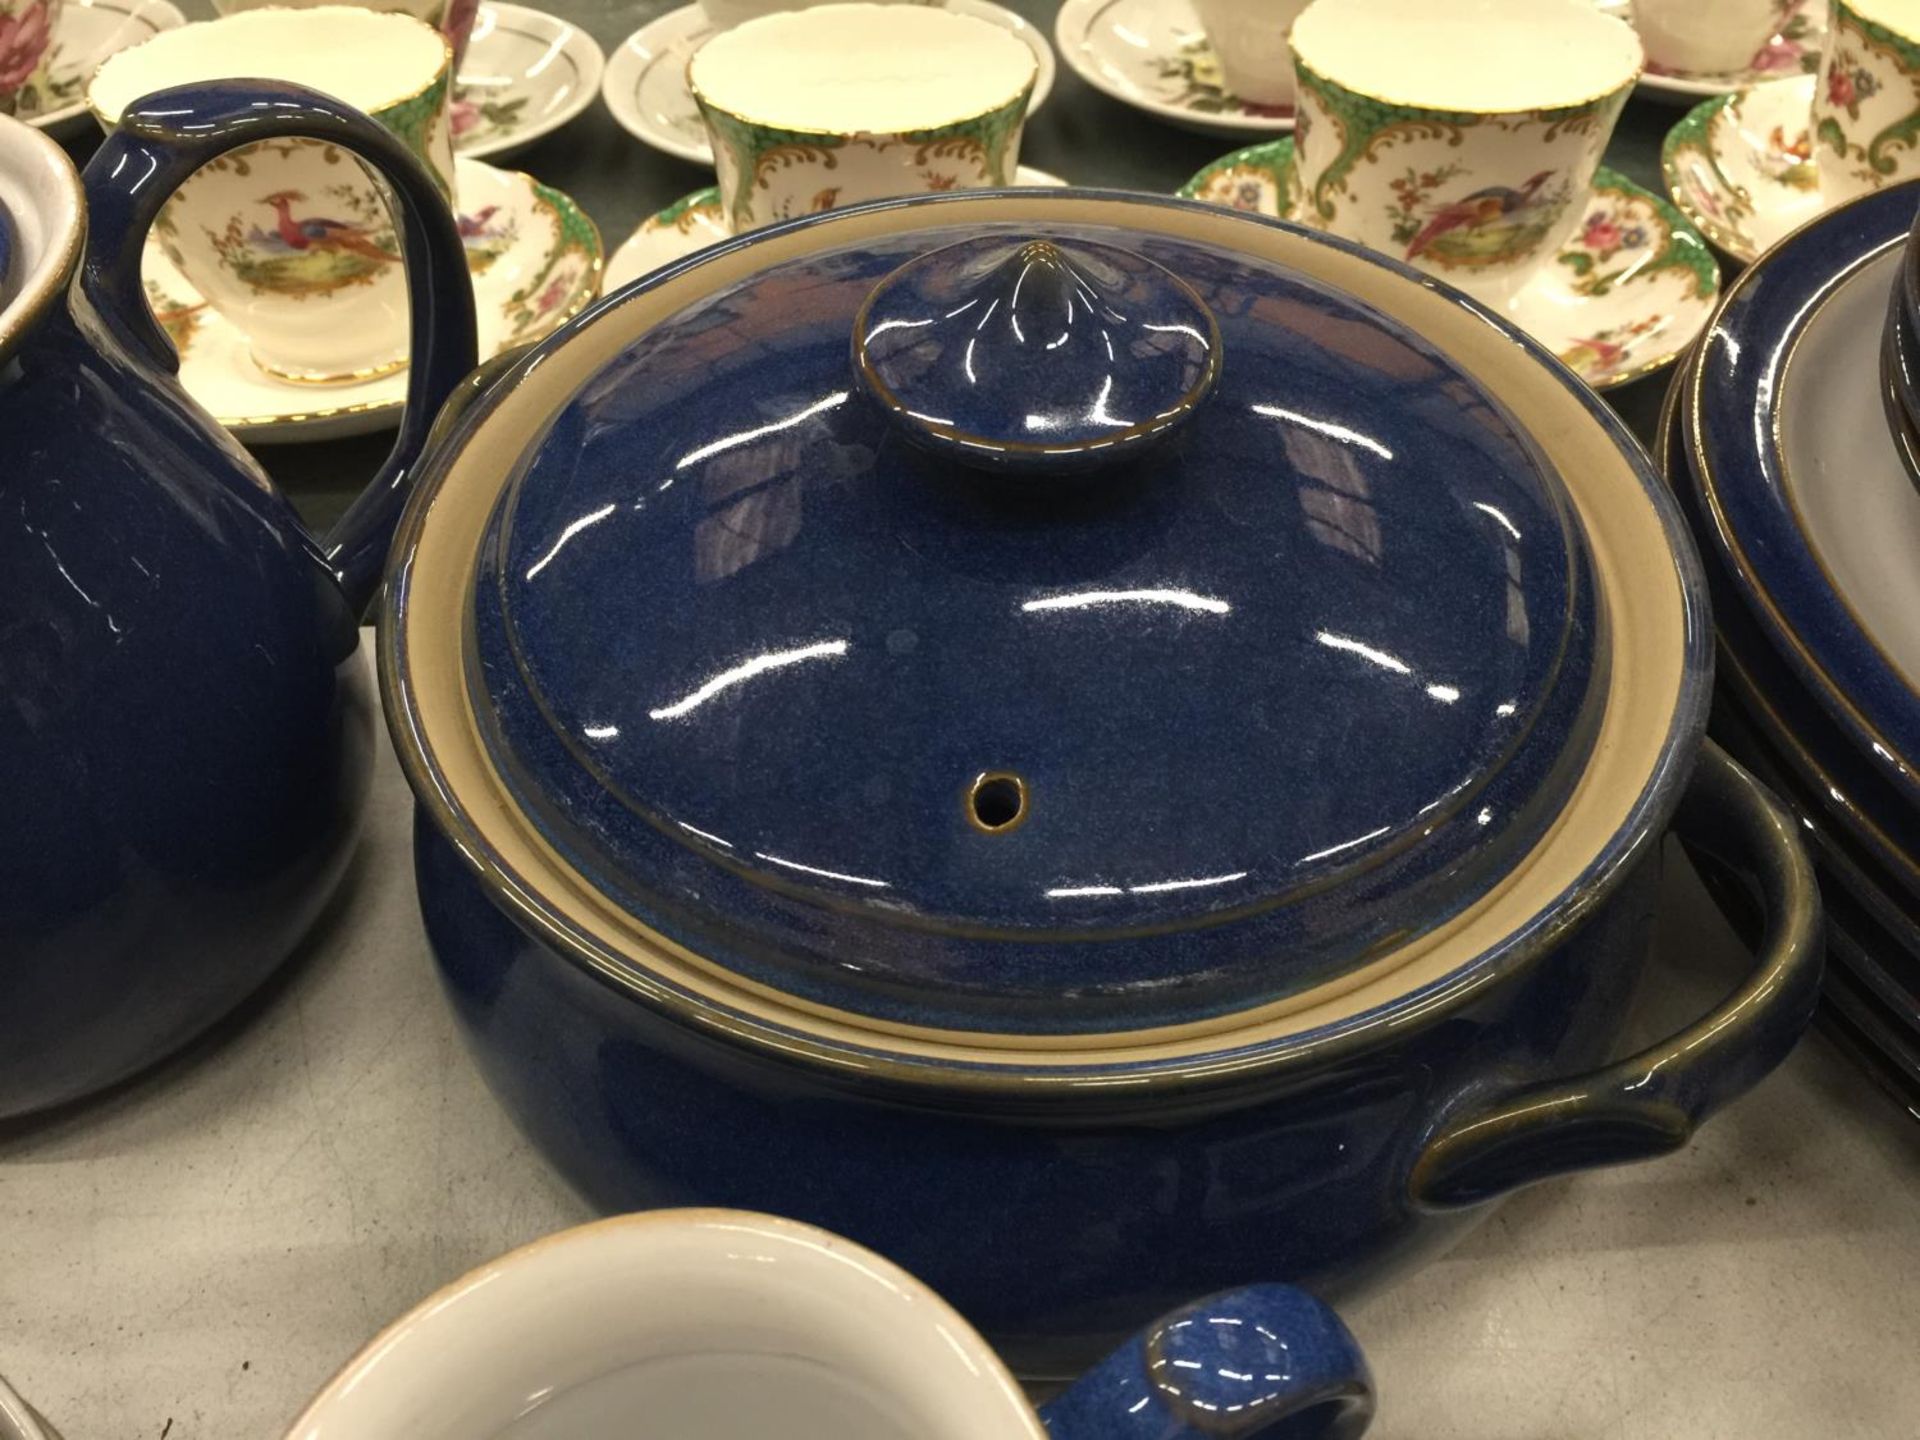 A DENBY DINNER SERVICE IN BLUE TO INCLUDE PLATES, BOWLS, TEAPOTS, SERVING TUREEN, MILK JUGS, SUGAR - Image 7 of 9